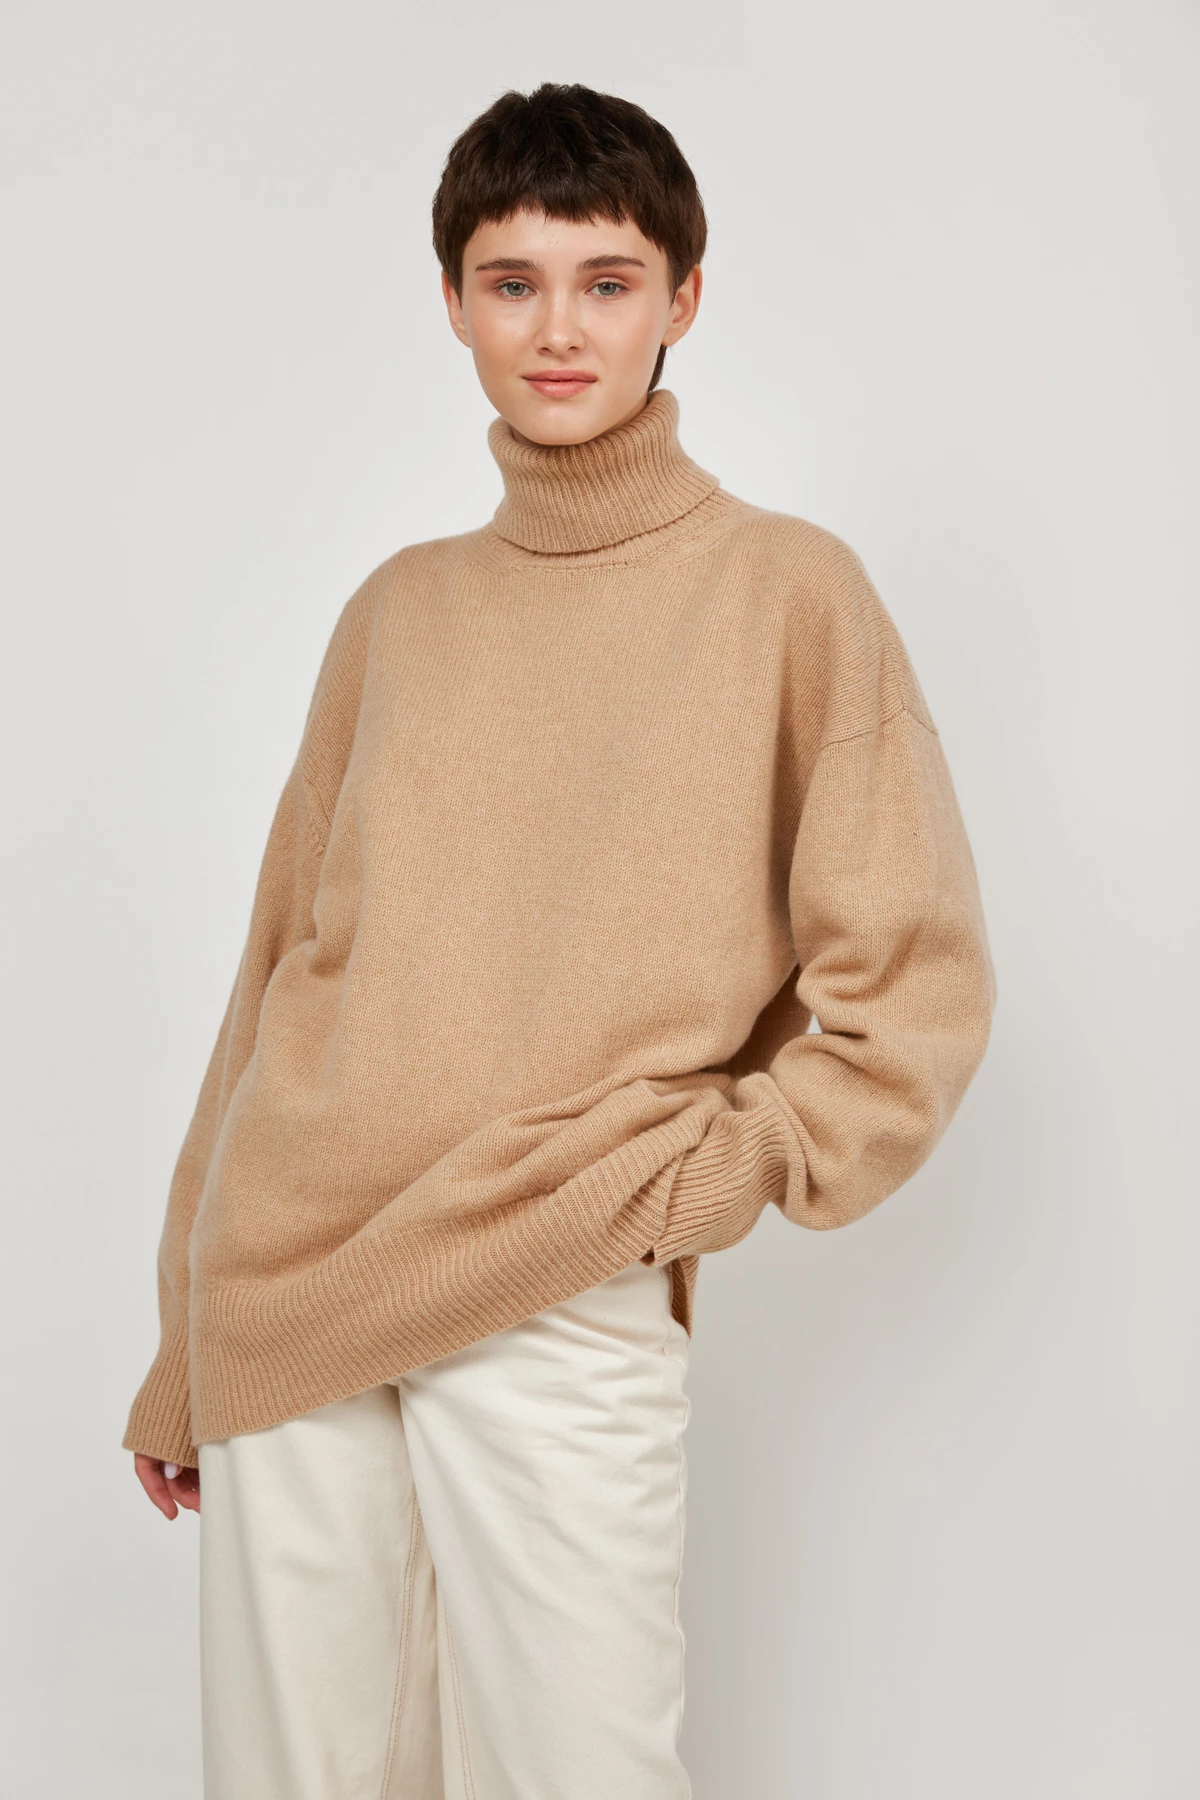 Cashmere beige knitted oversized sweater, photo 3